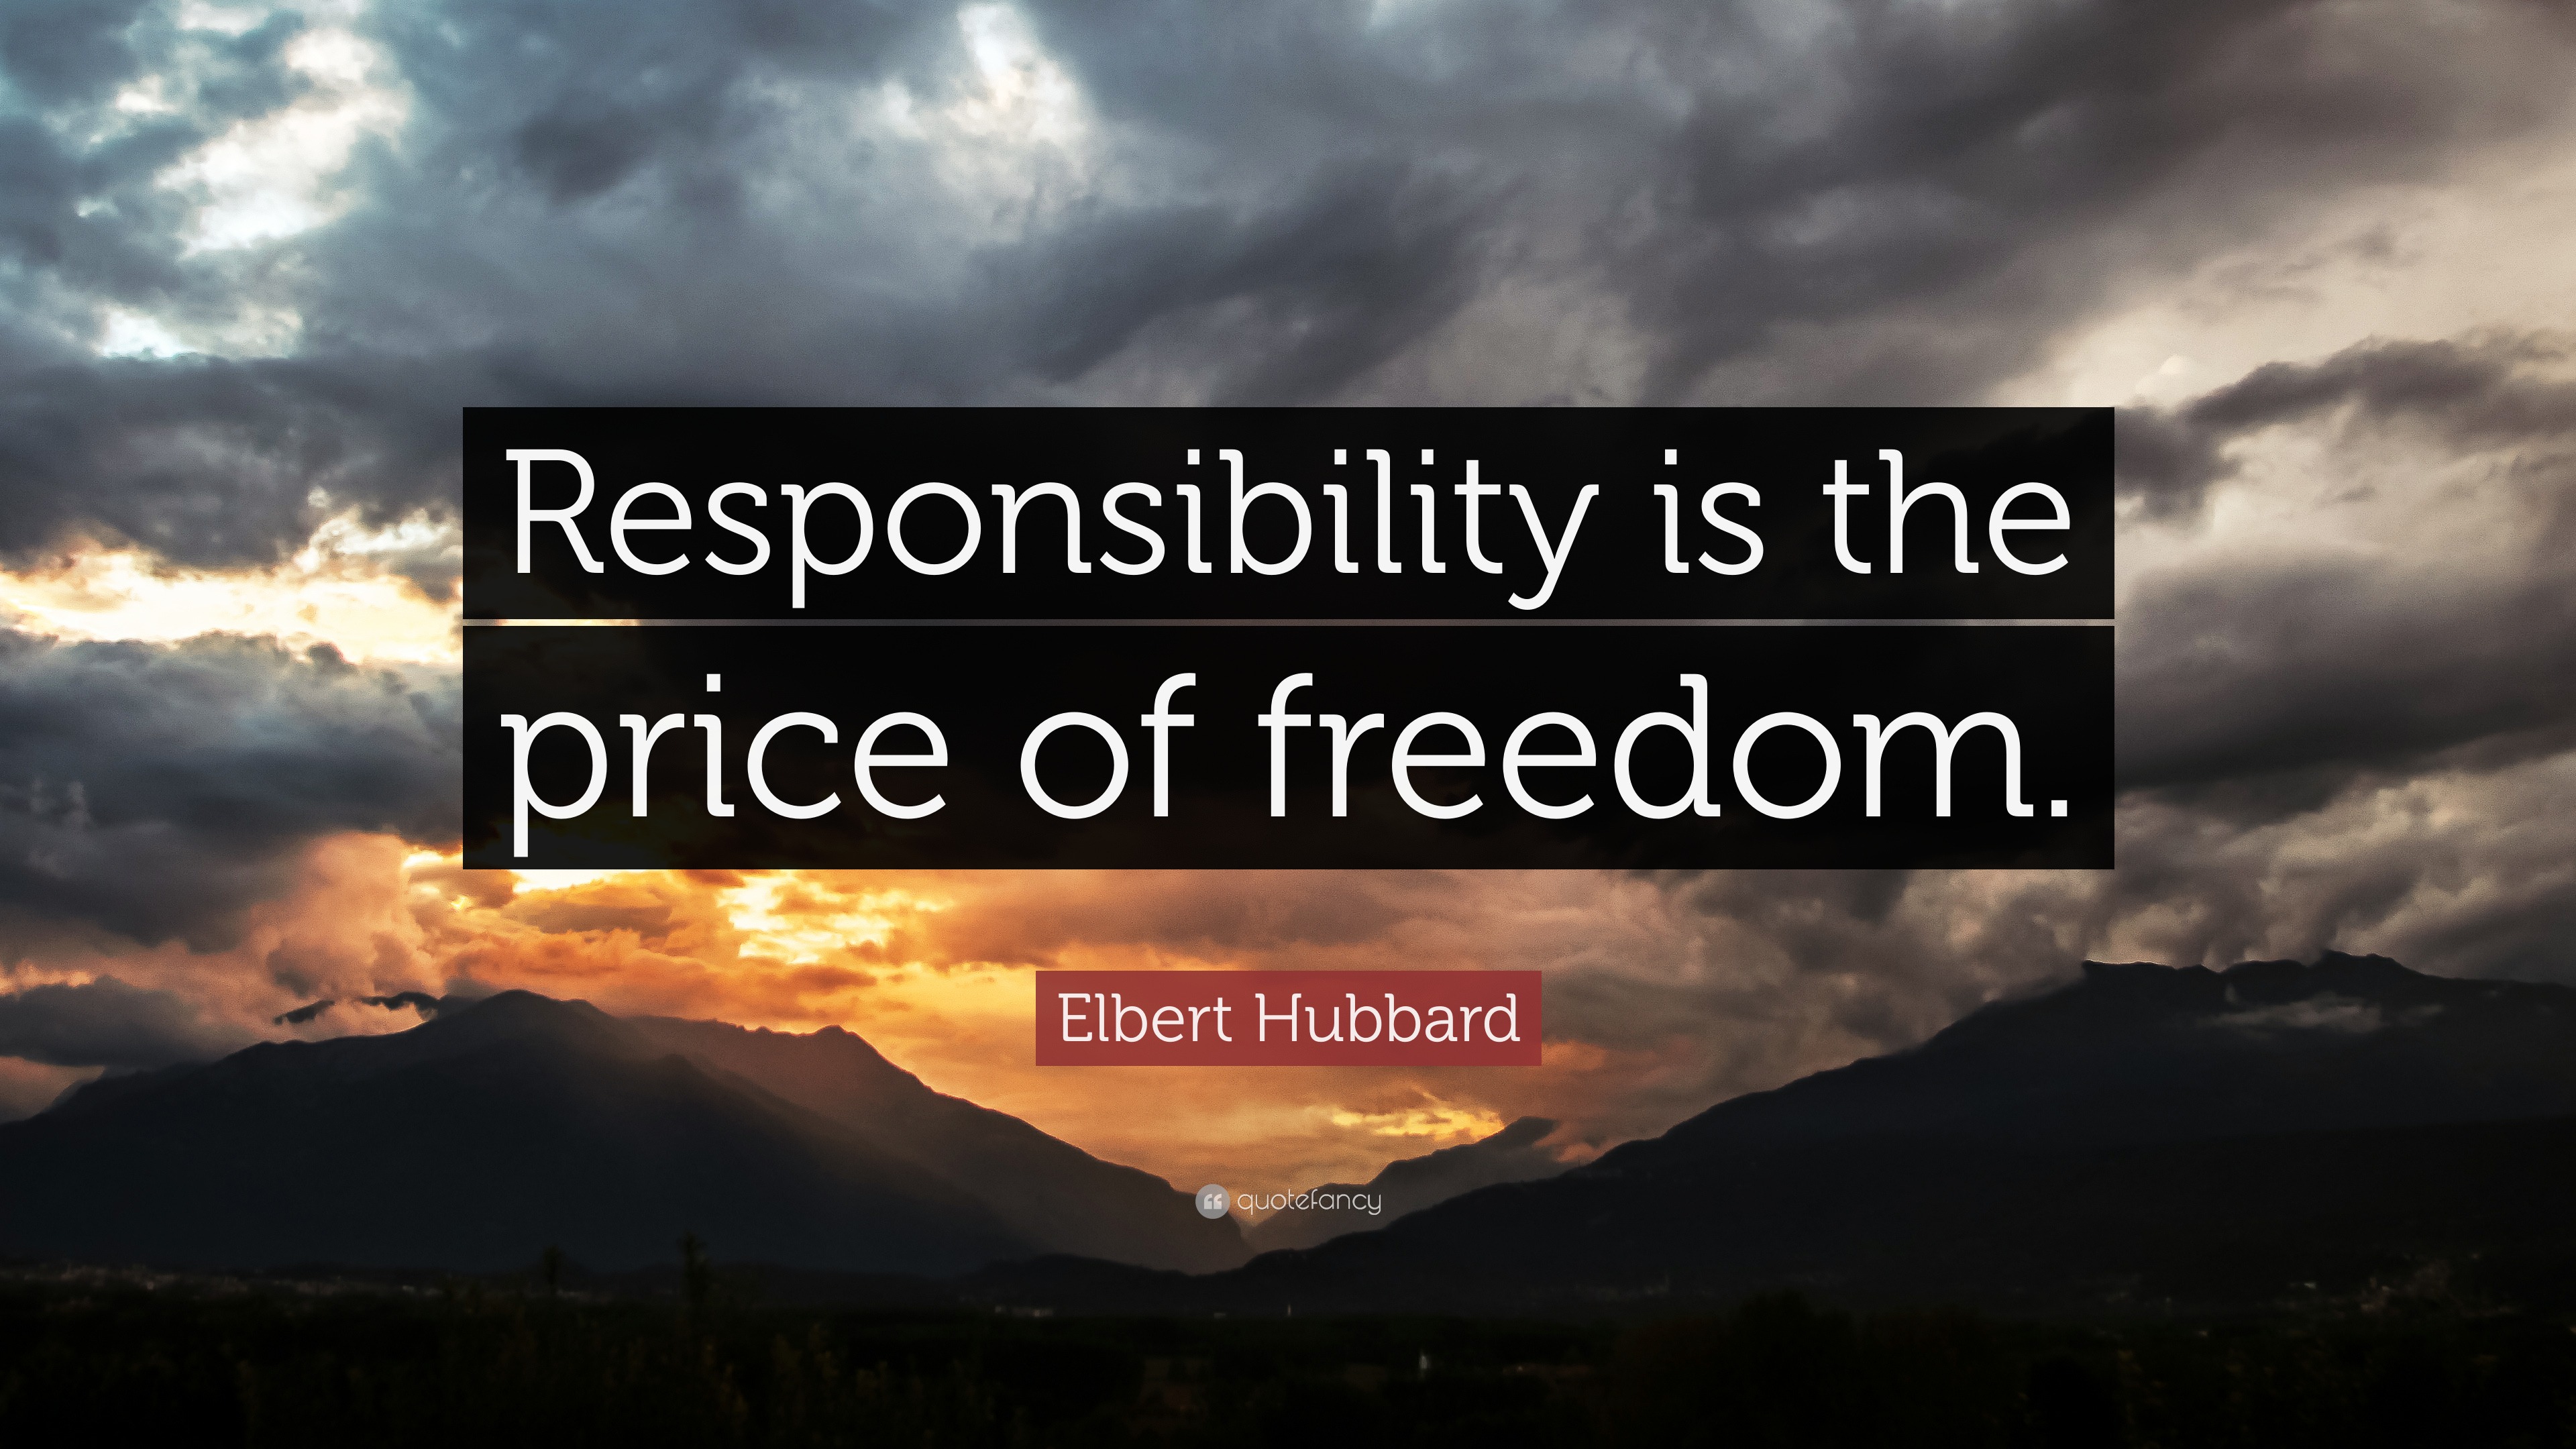 Elbert Hubbard Quote “Responsibility is the price of